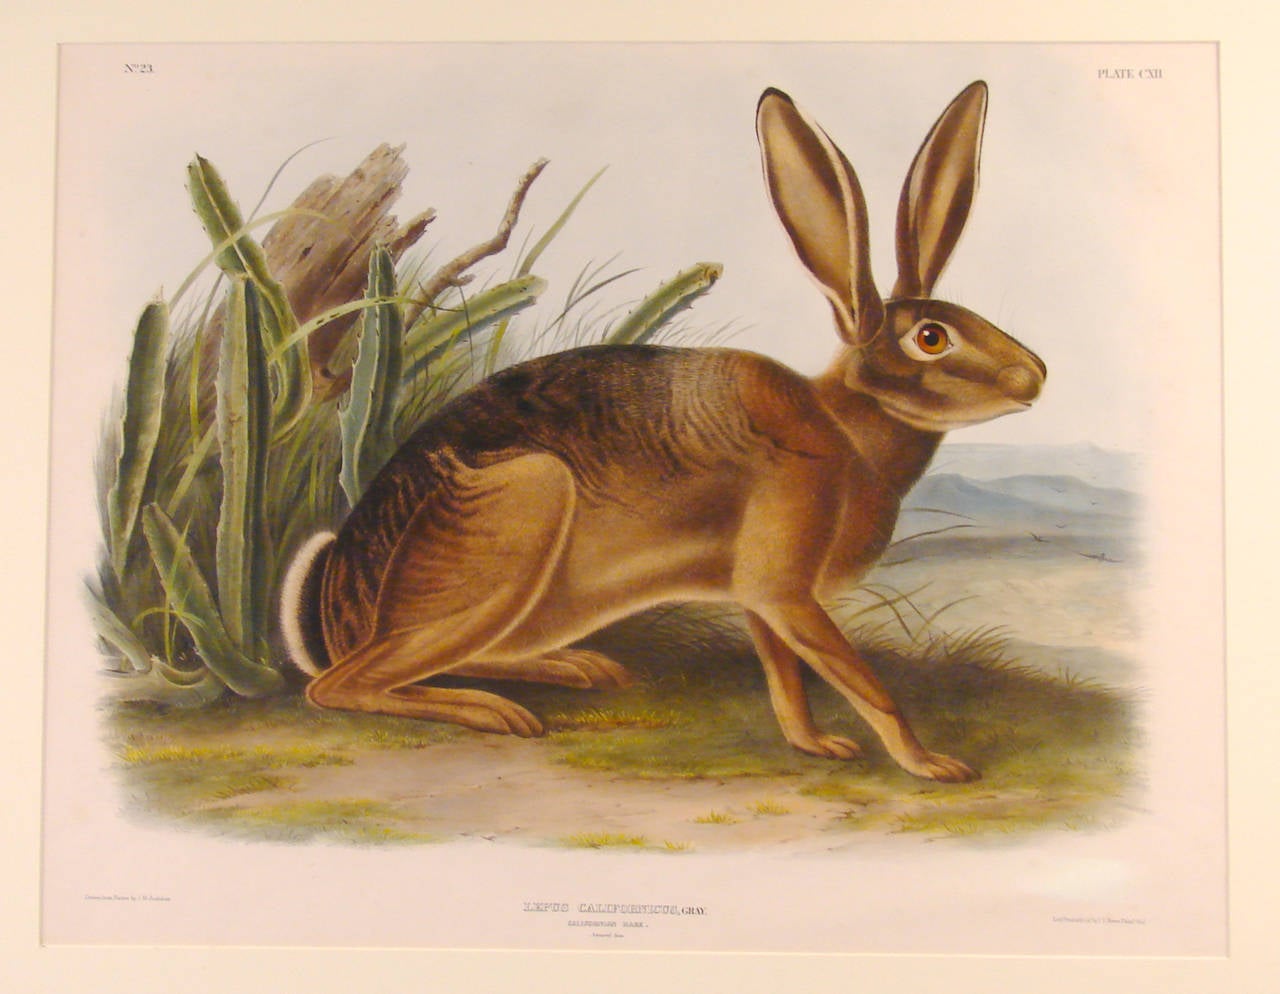 John Woodhouse Audubon (American, 1812-1862) from the Bowen edition of The Viviparous Quadrupeds of North America, hand-colored lithograph on heavy wove paper, with margins, colors attenuated, with acid free mat and custom oak frame.